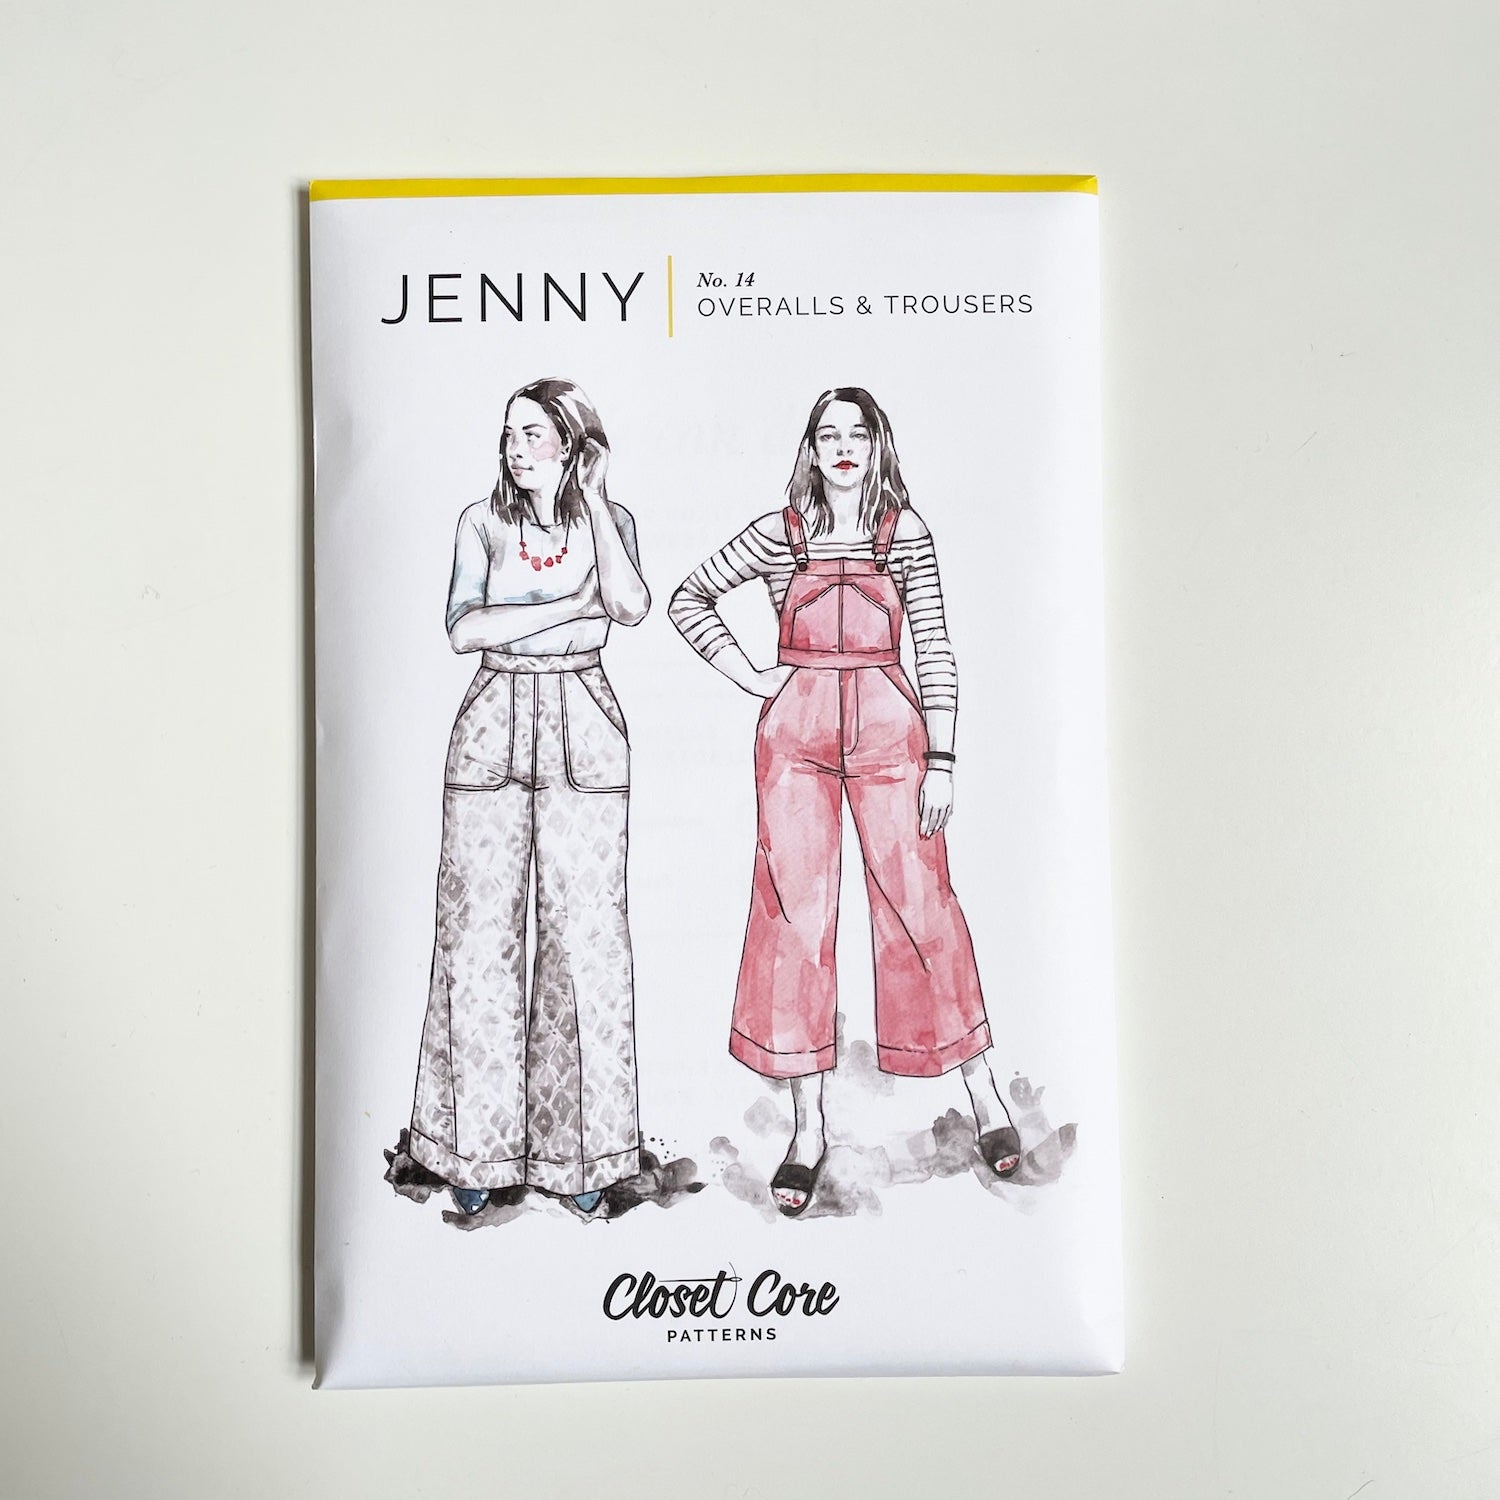 Closet Case Patterns : Jenny Overalls & Trousers